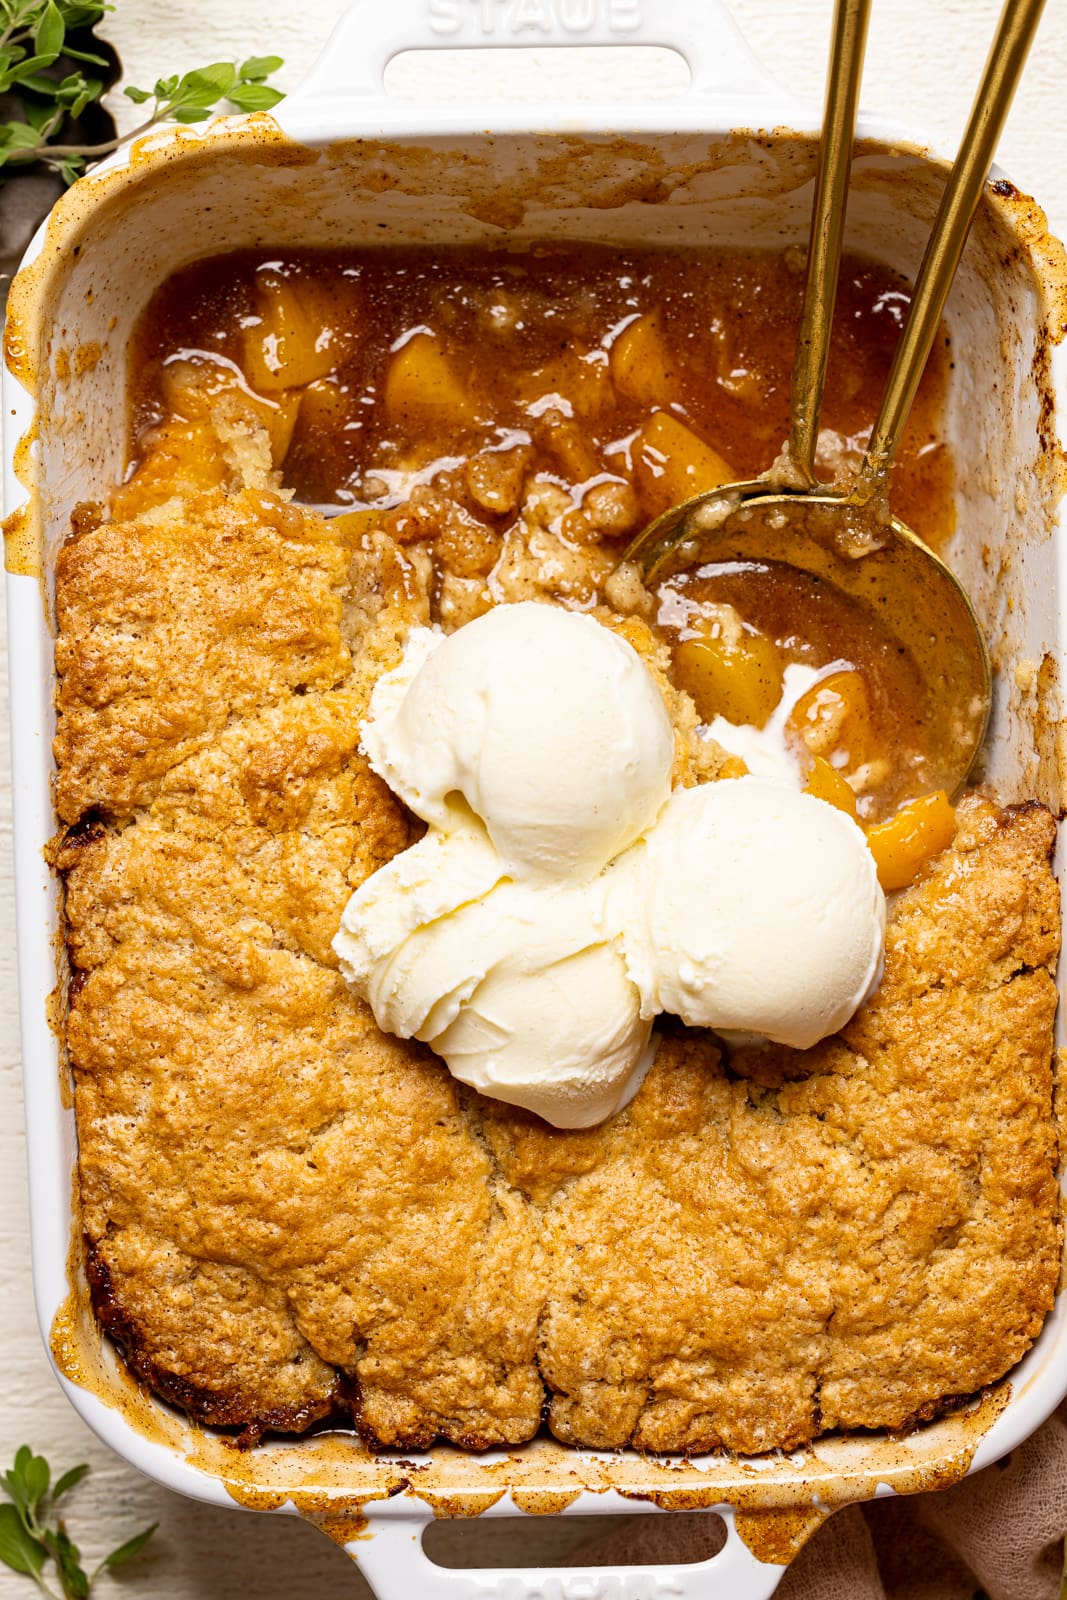 Up close shot of peach cobbler in baking dish with scoops of ice cream on top and two serving spoons.